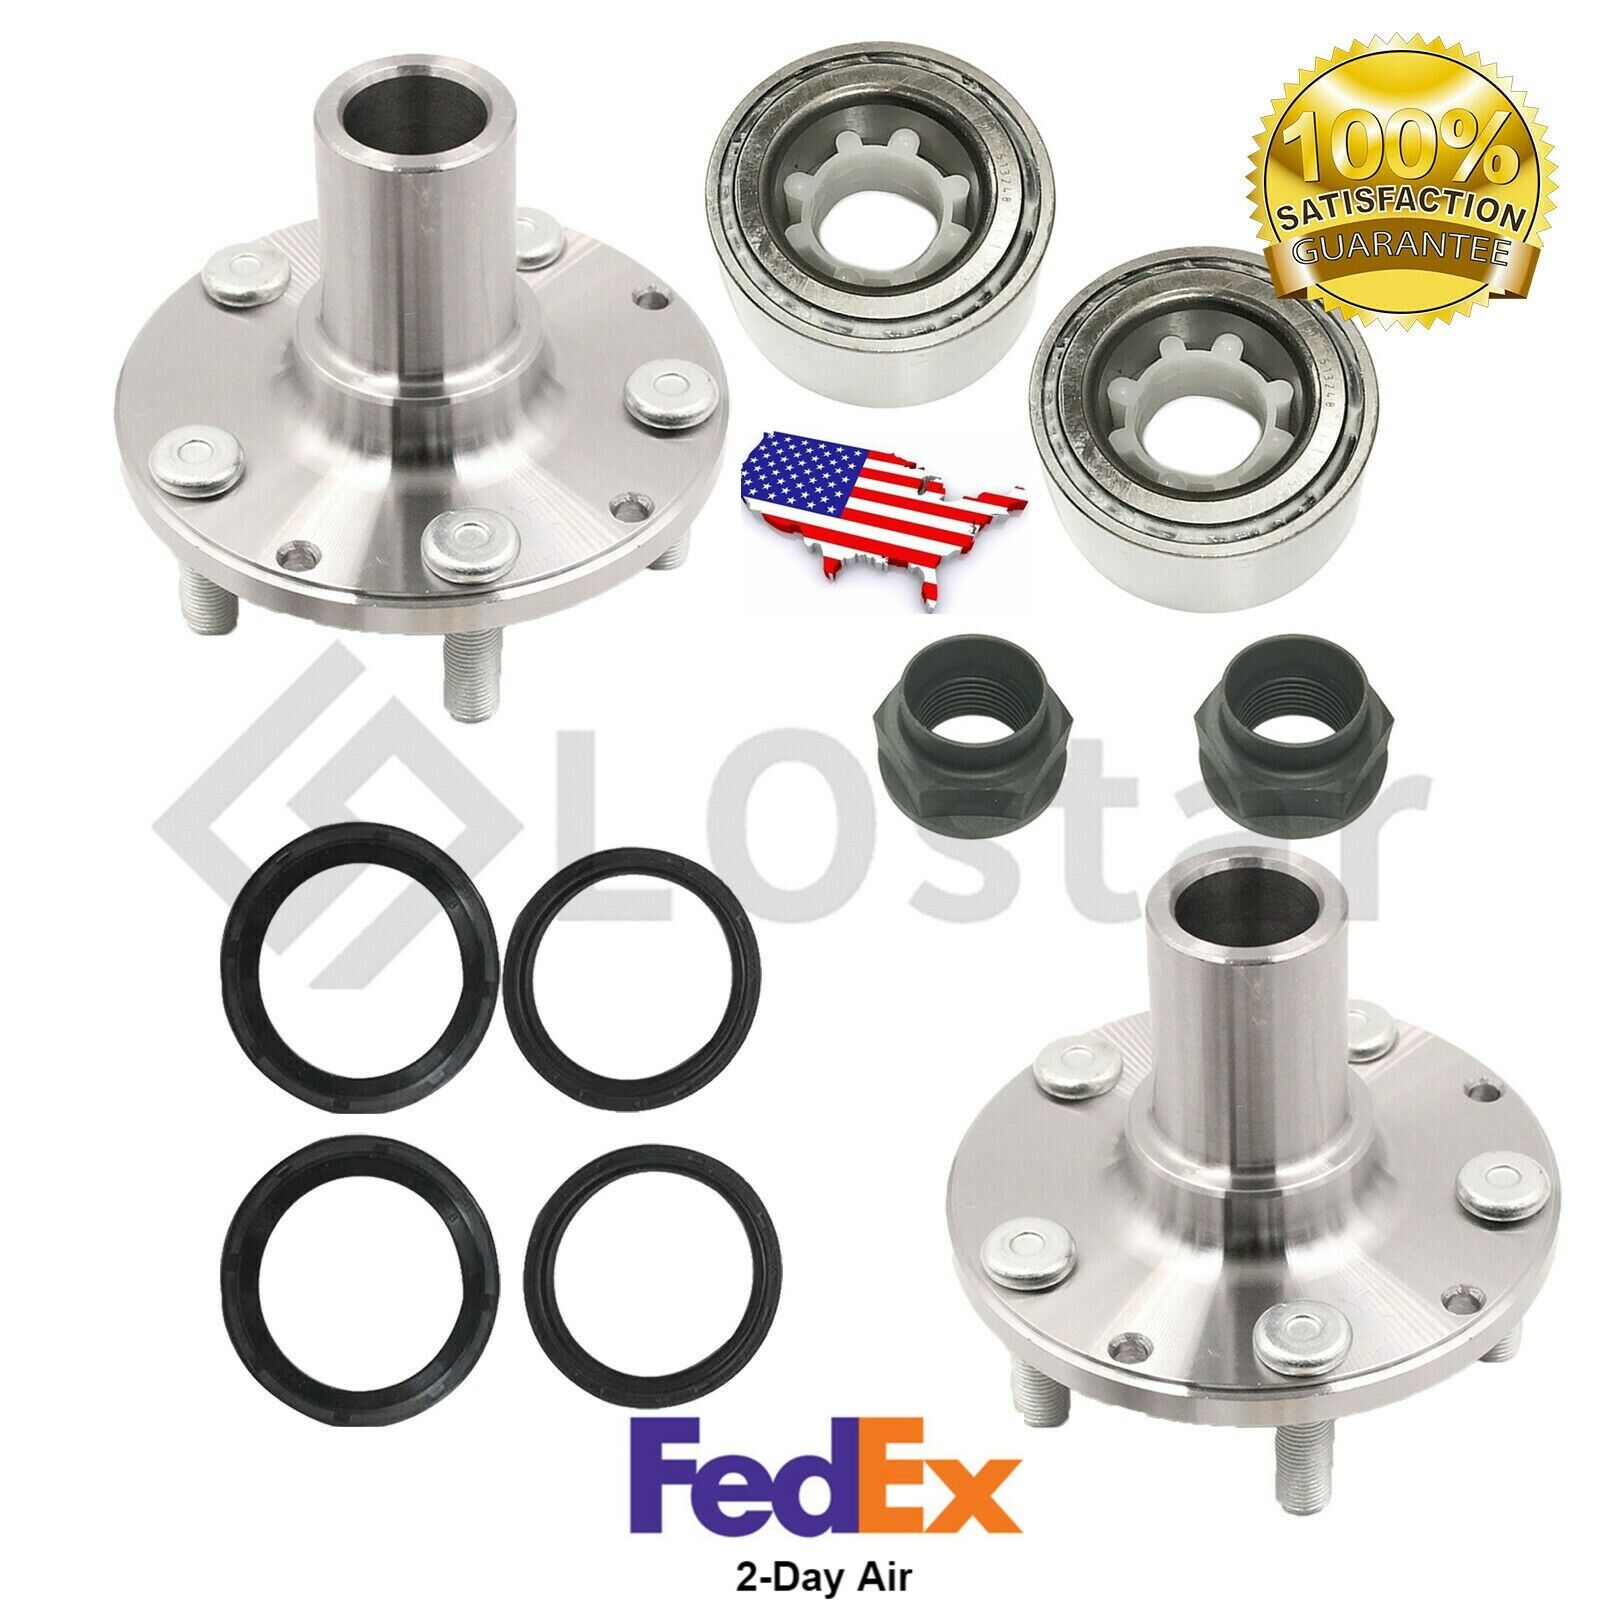 Pair(2) New Rear Wheel Hub & Bearing Fits Subaru Legacy Forester With Seal